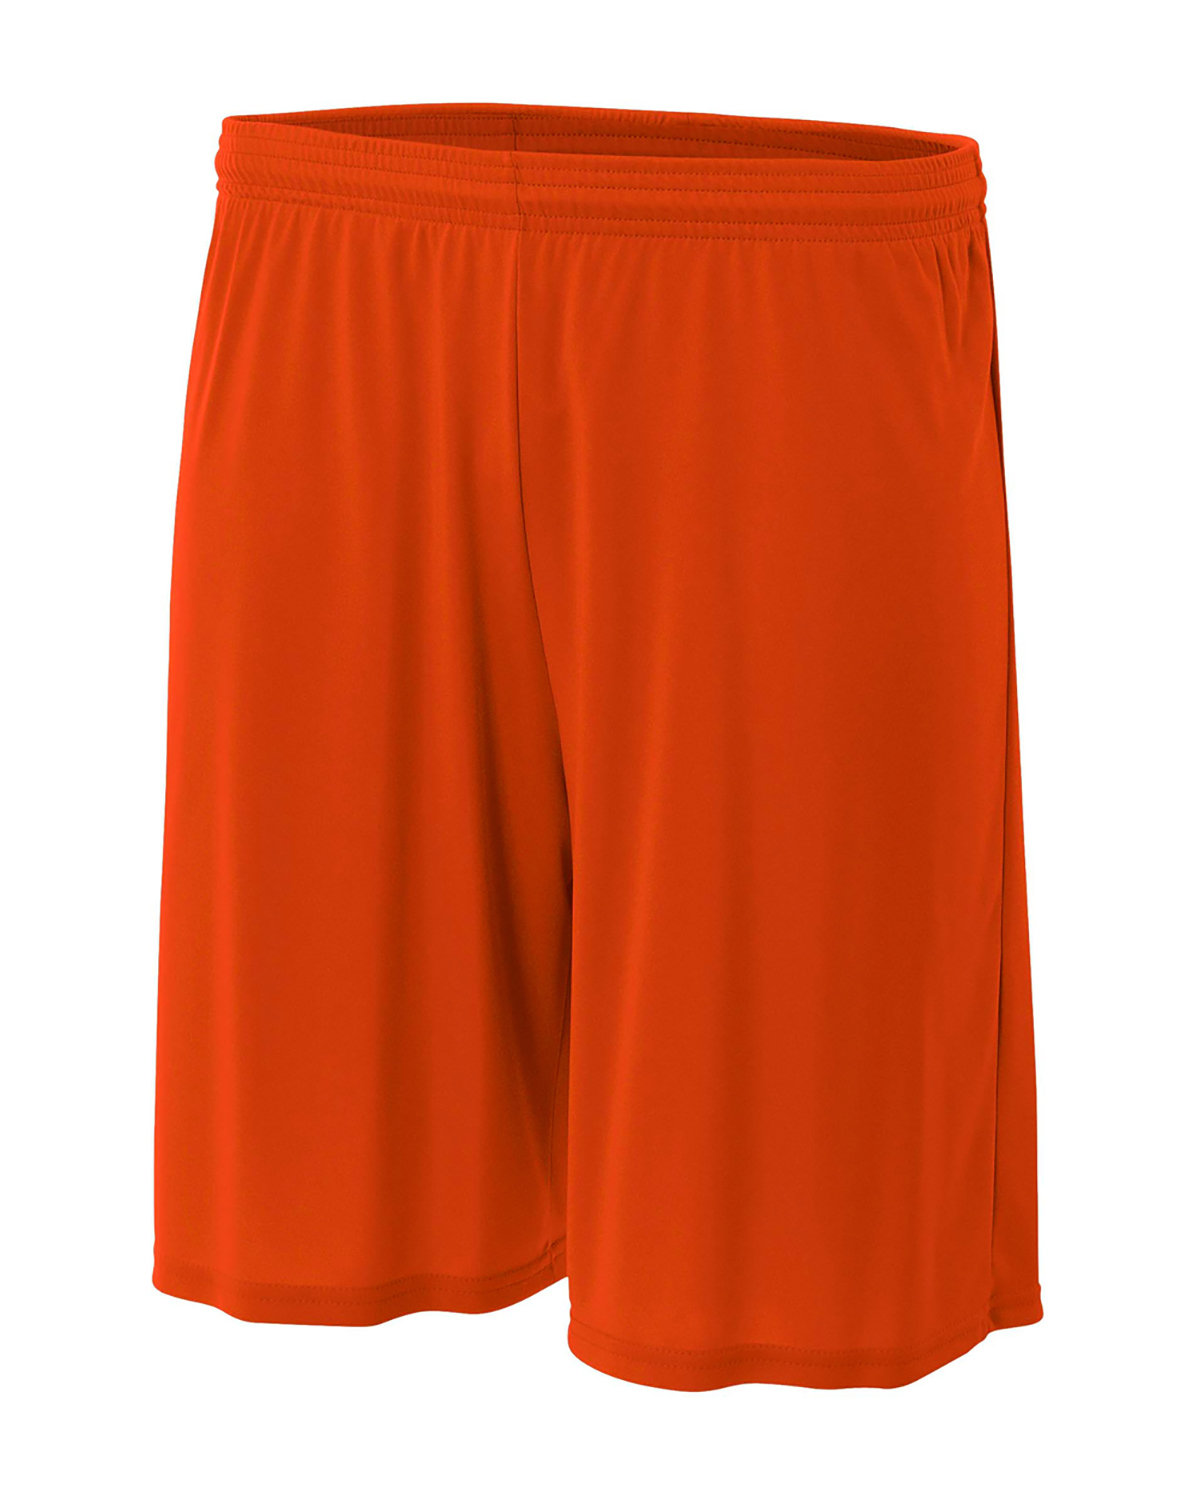 A4 Youth Cooling Performance Polyester Short ATHLETIC ORANGE 